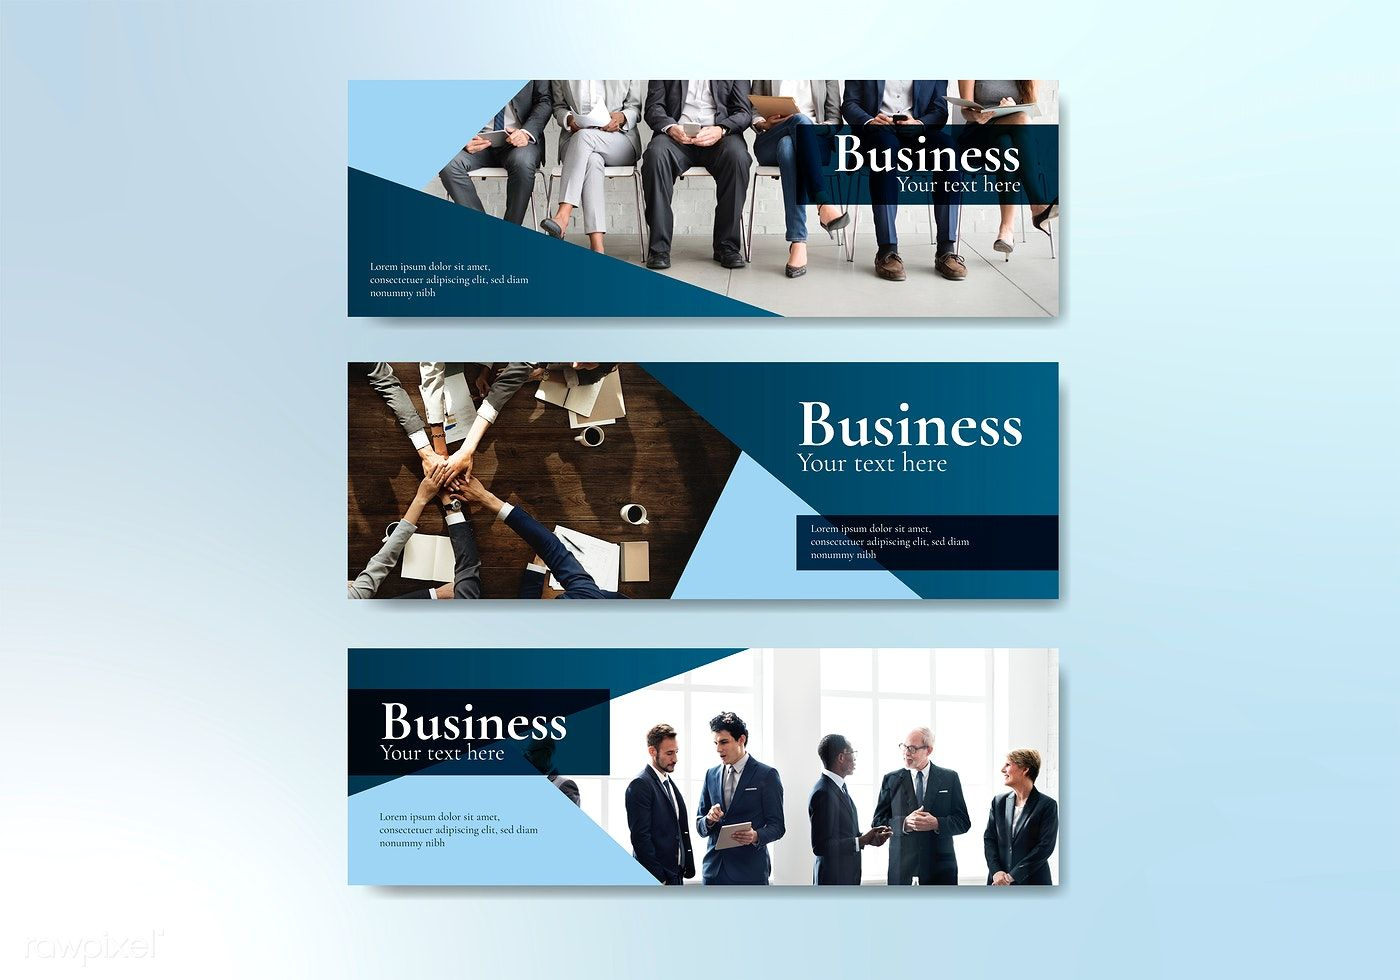 Business Website Banner Design Vector | Free Image Throughout Photography Banner Template